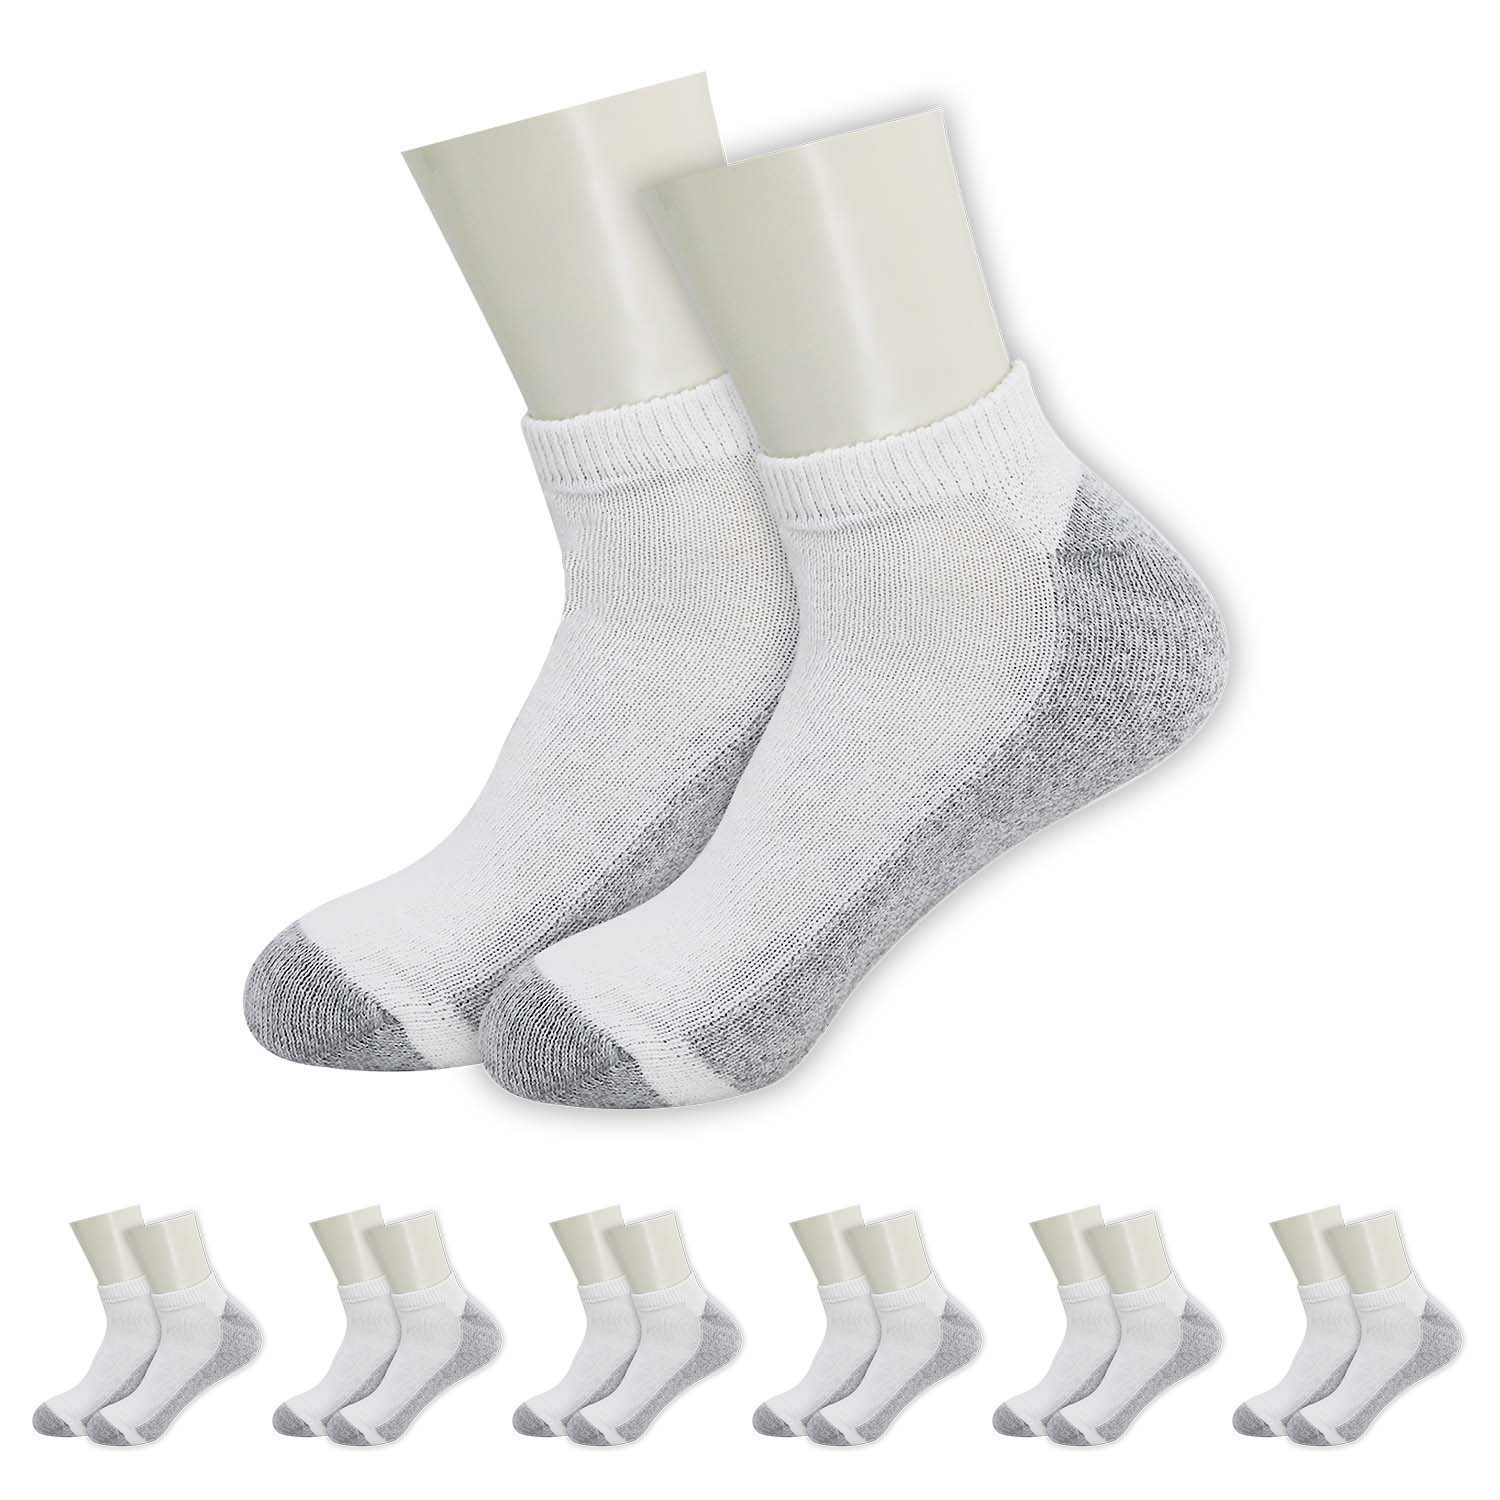 Unisex Low Cut Wholesale Sock, Size 10-13 in White with Grey - Bulk Case of 180 Pairs